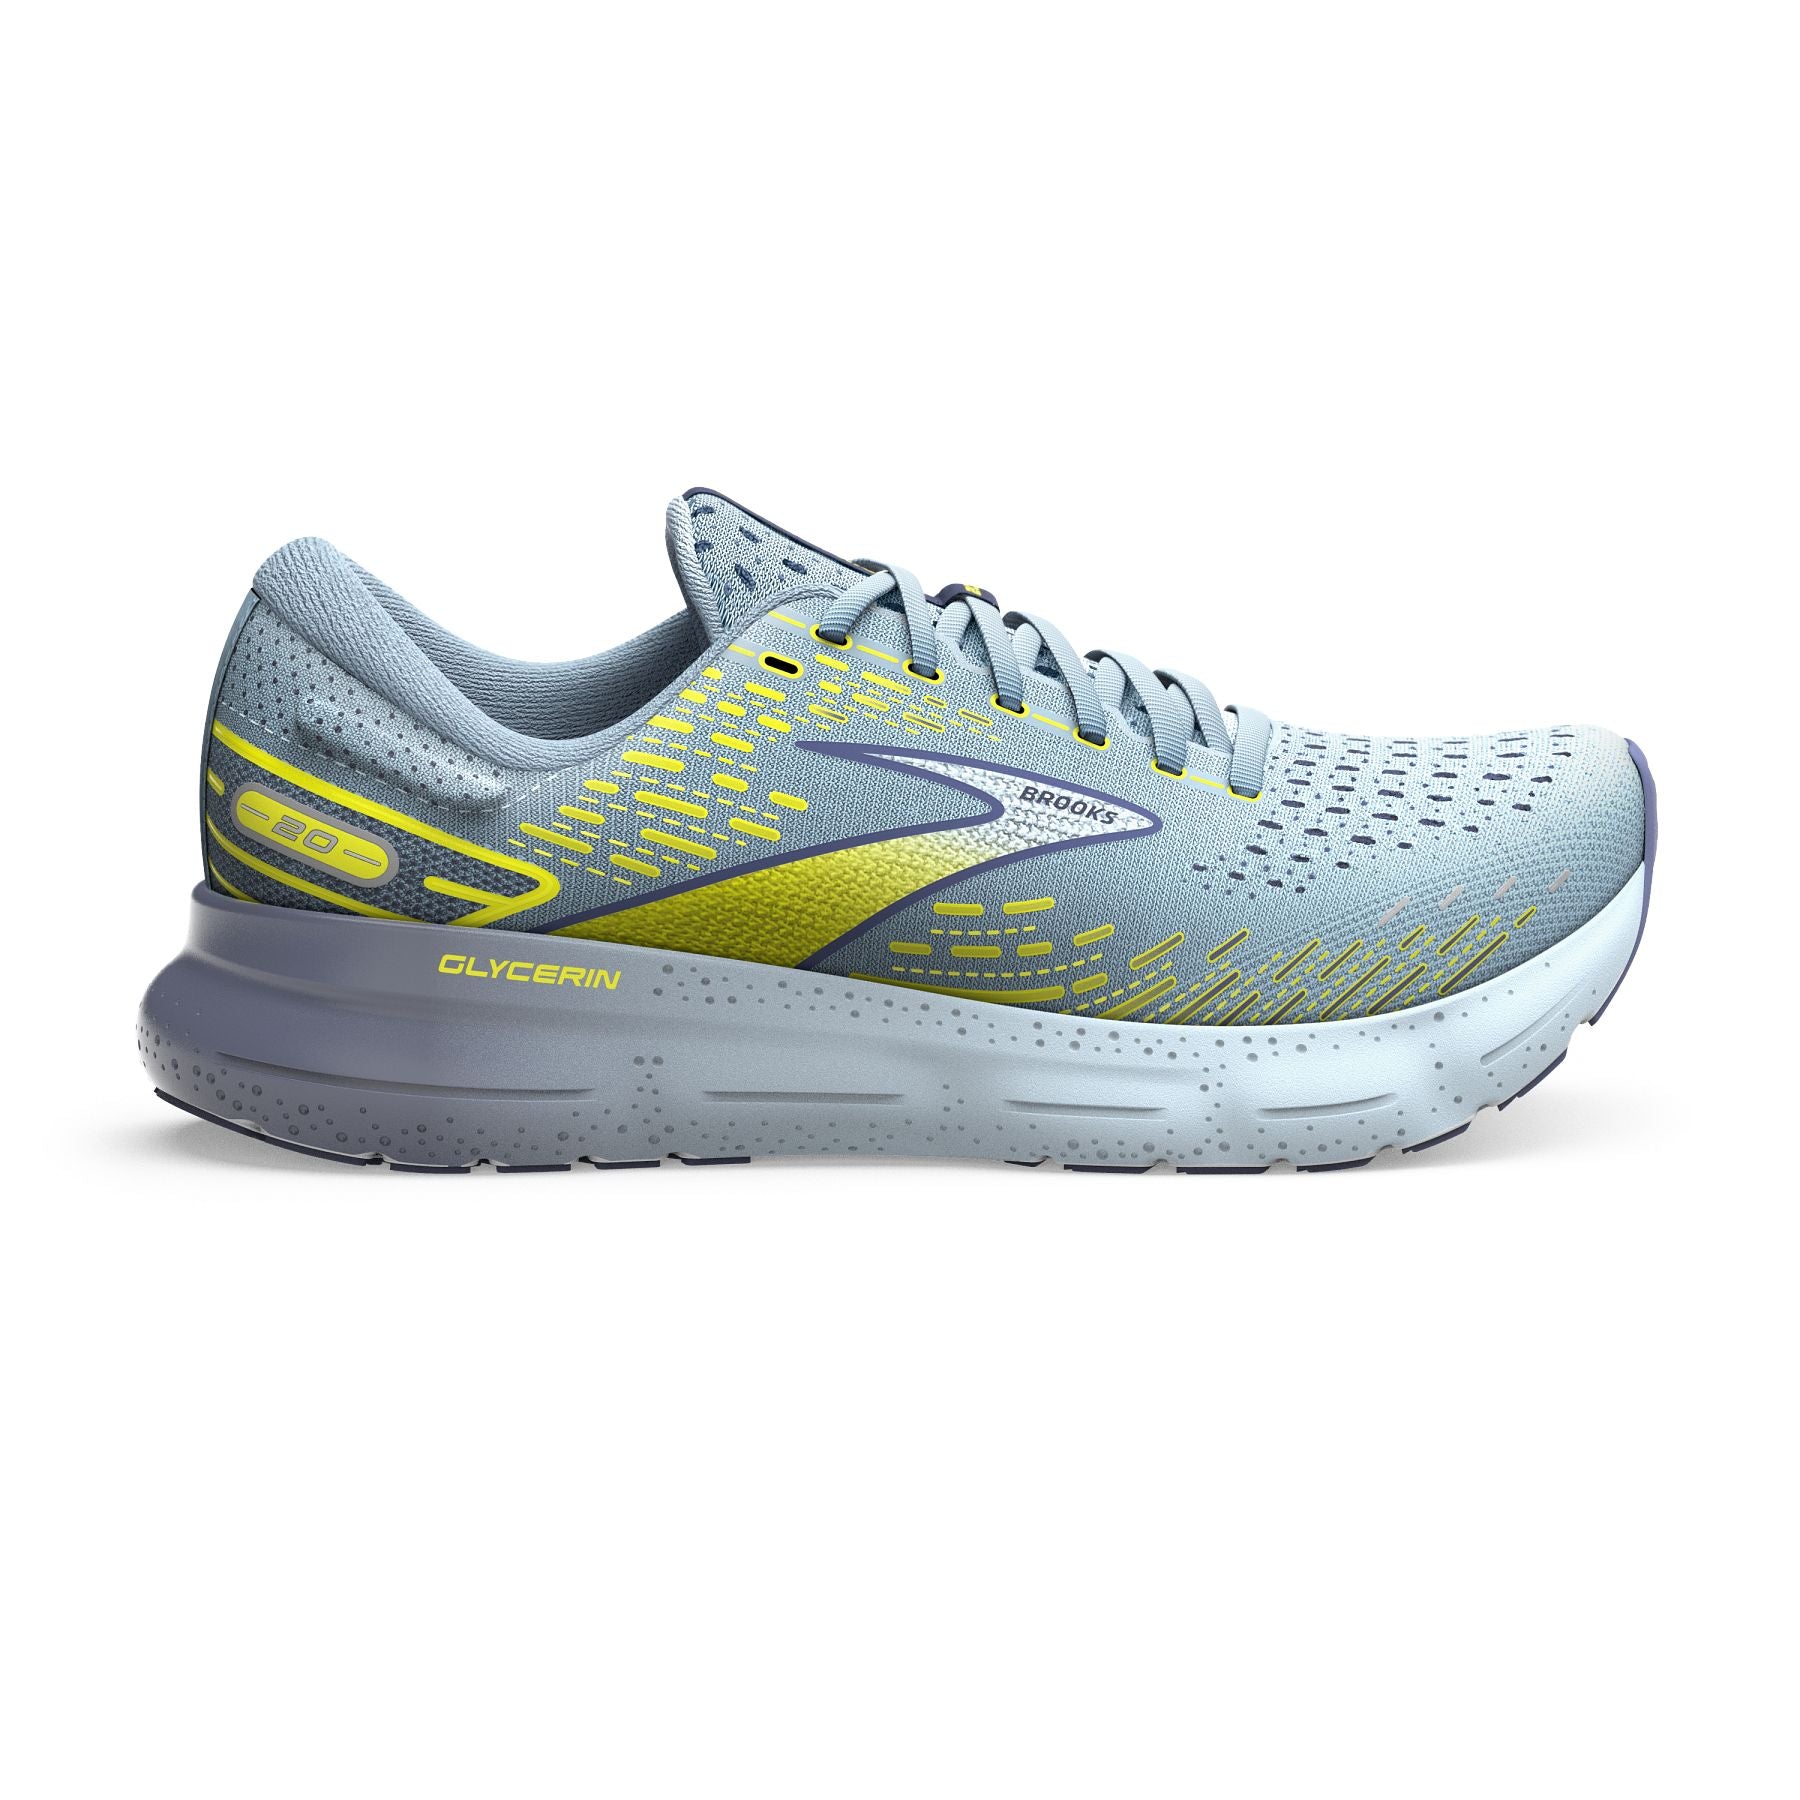 Lateral view of the Men's Glycerin 20 by Brook's in the color Blue/Crown Blue/Sulpur